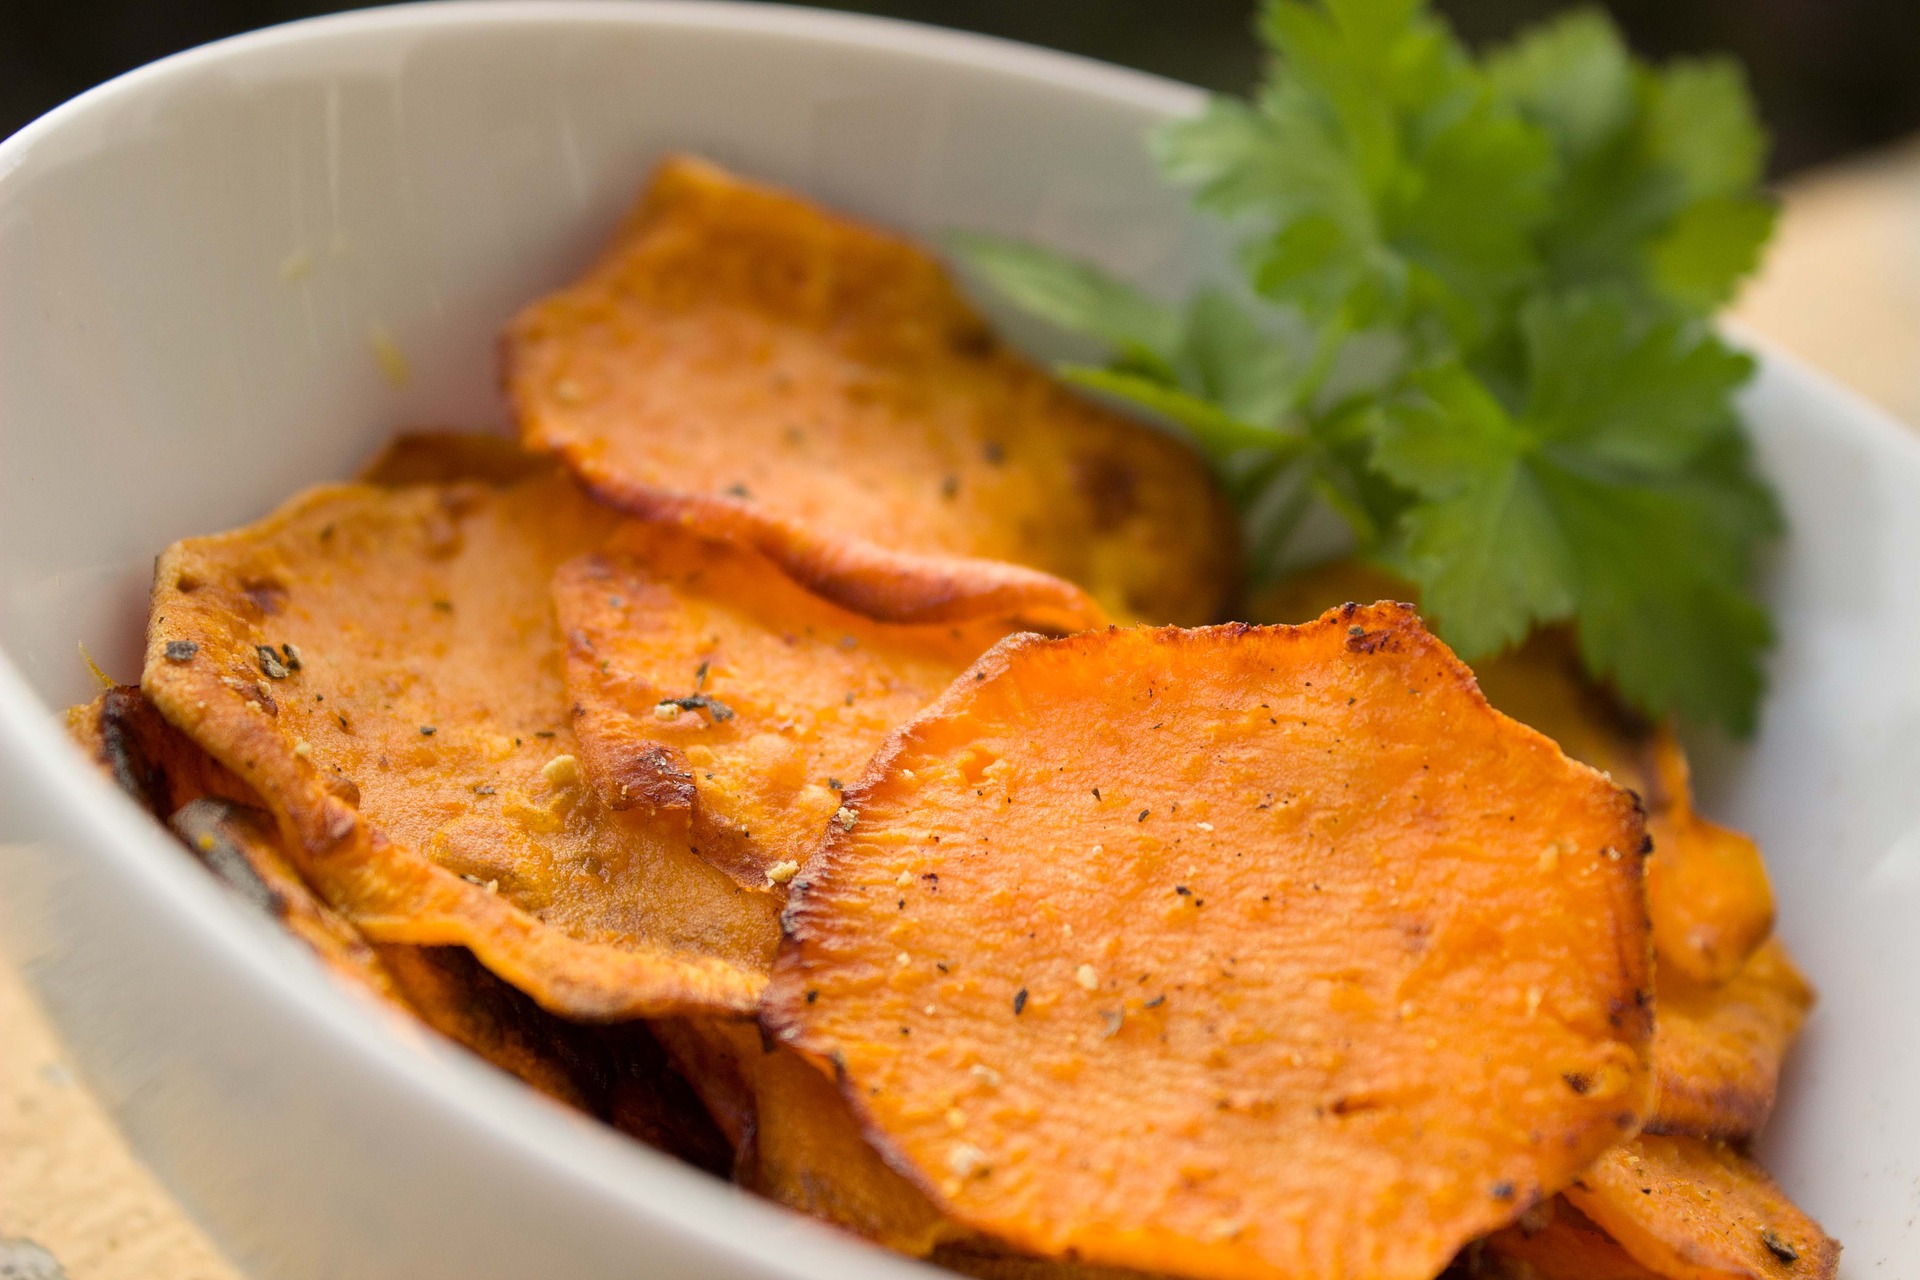 Sweet potatoes are a nutritious food